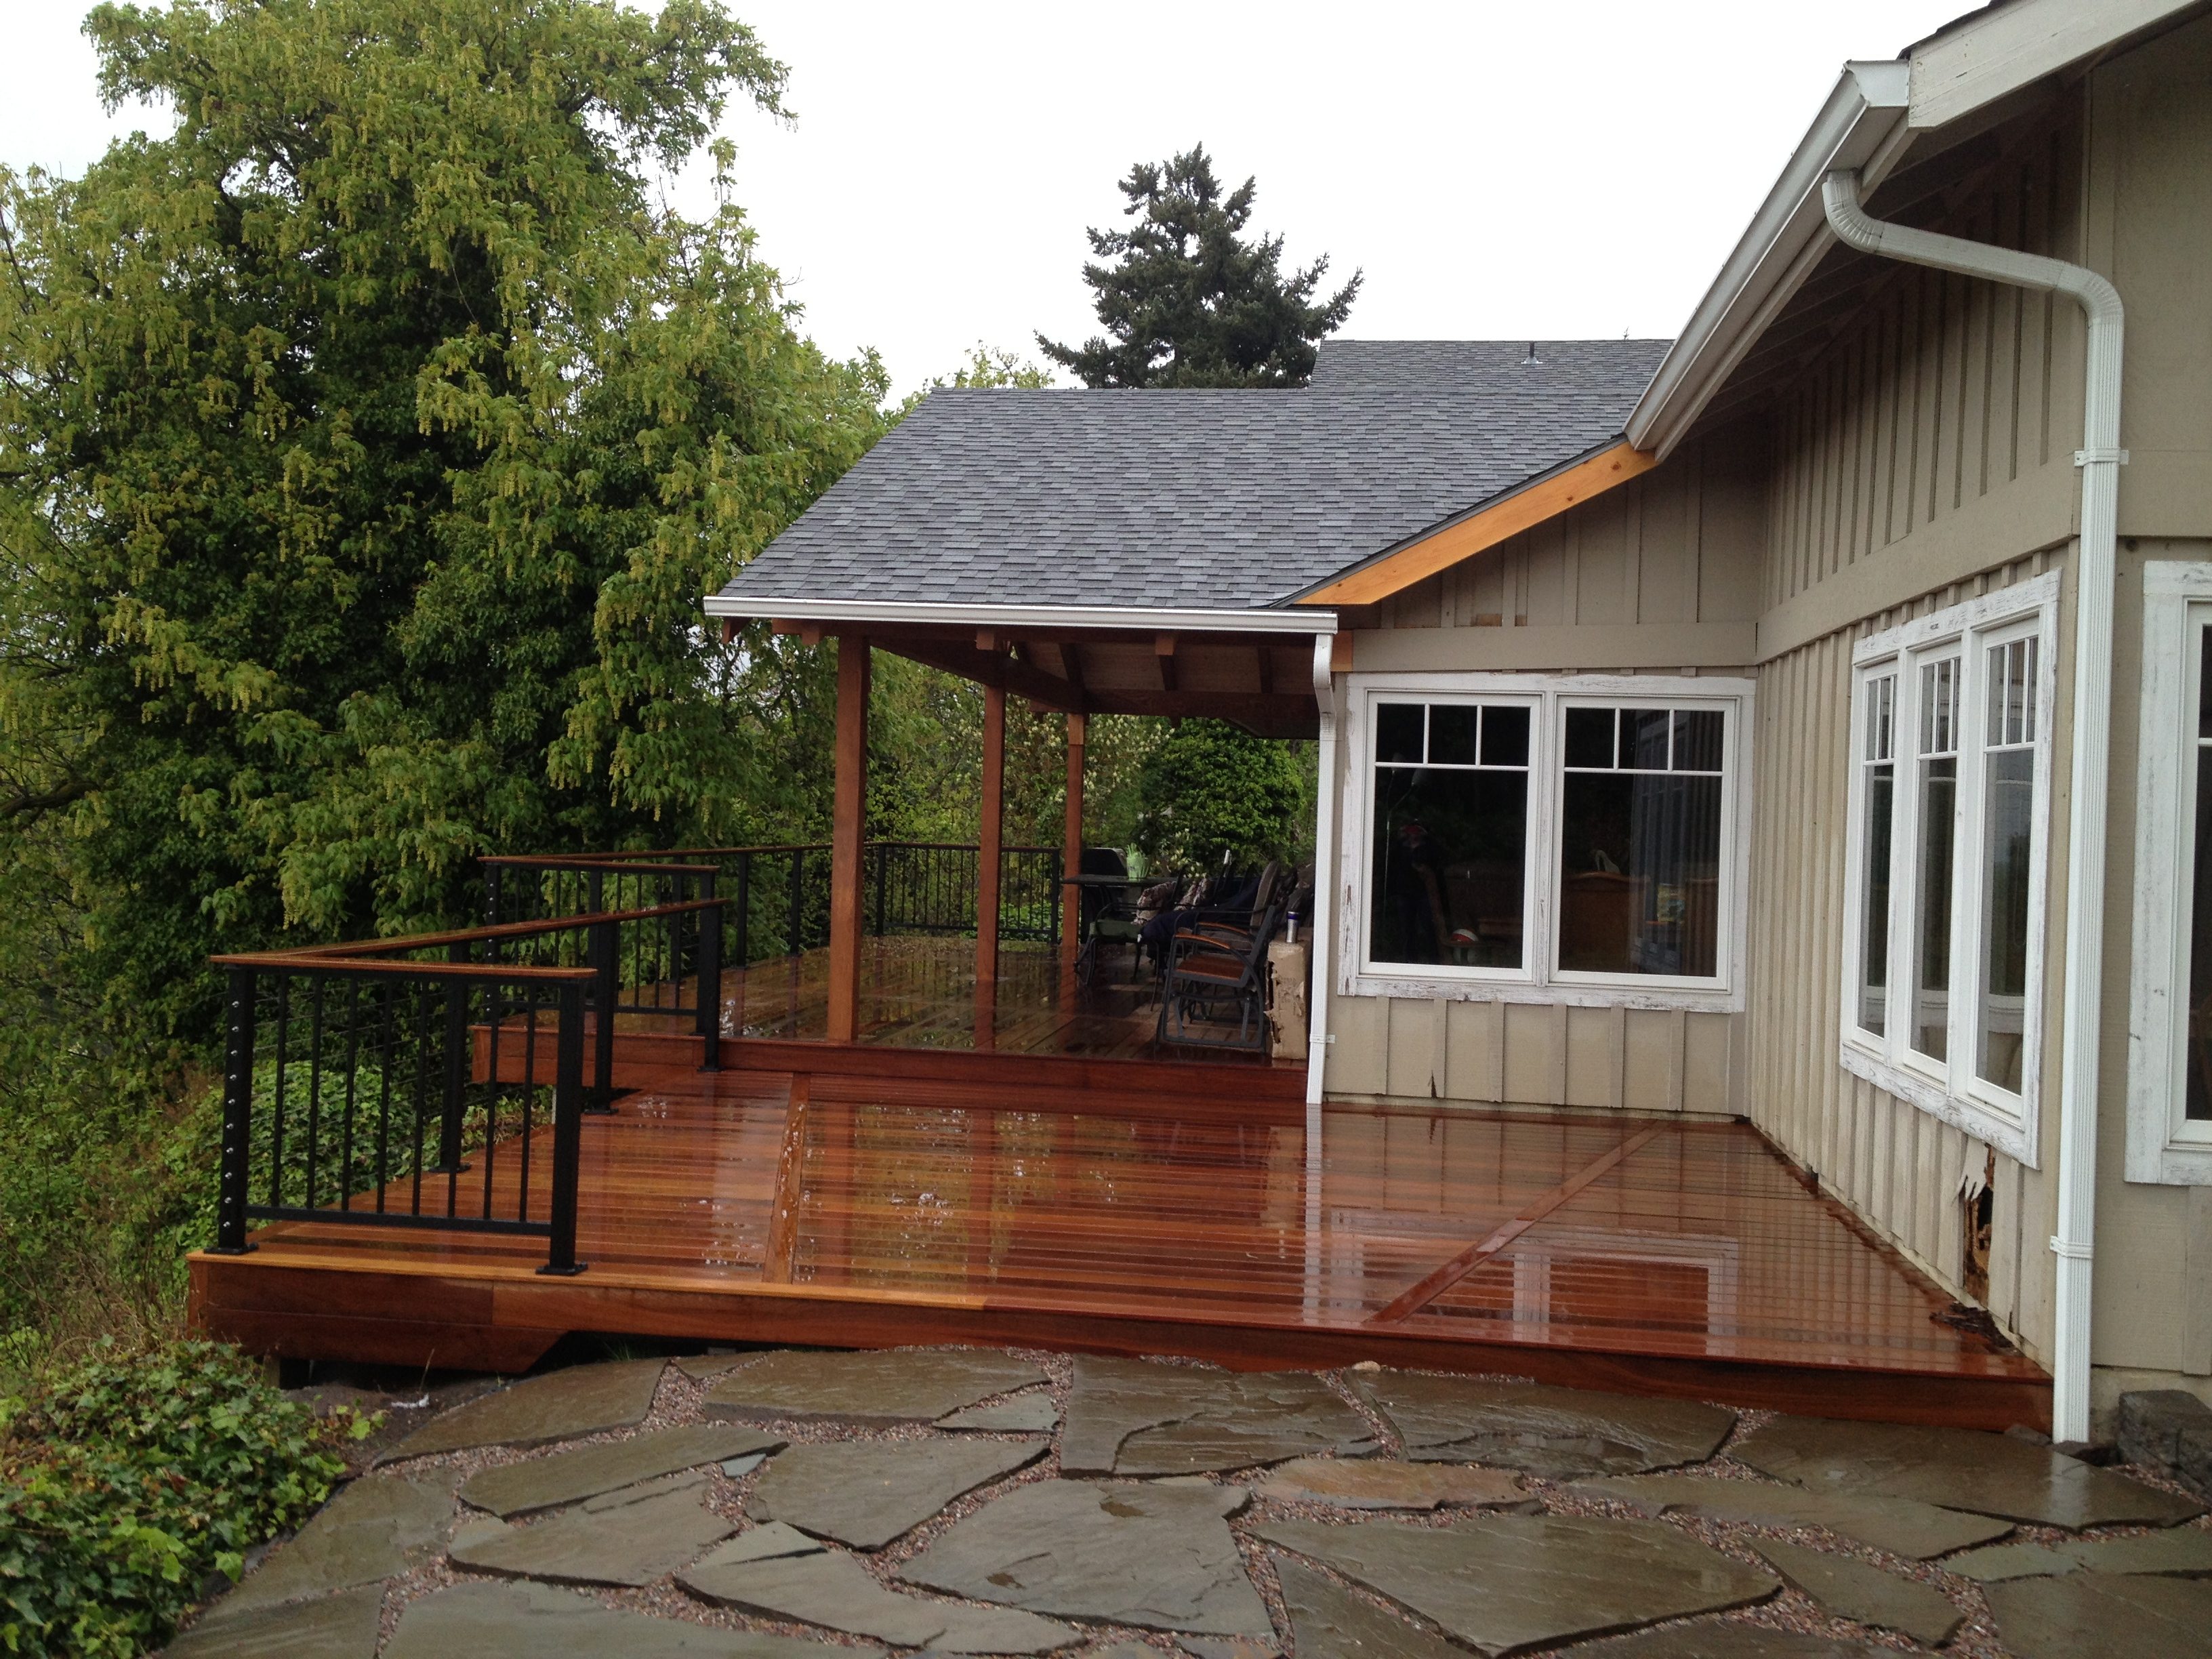 Ironwood deck with alumarail and overhang addition tied into home